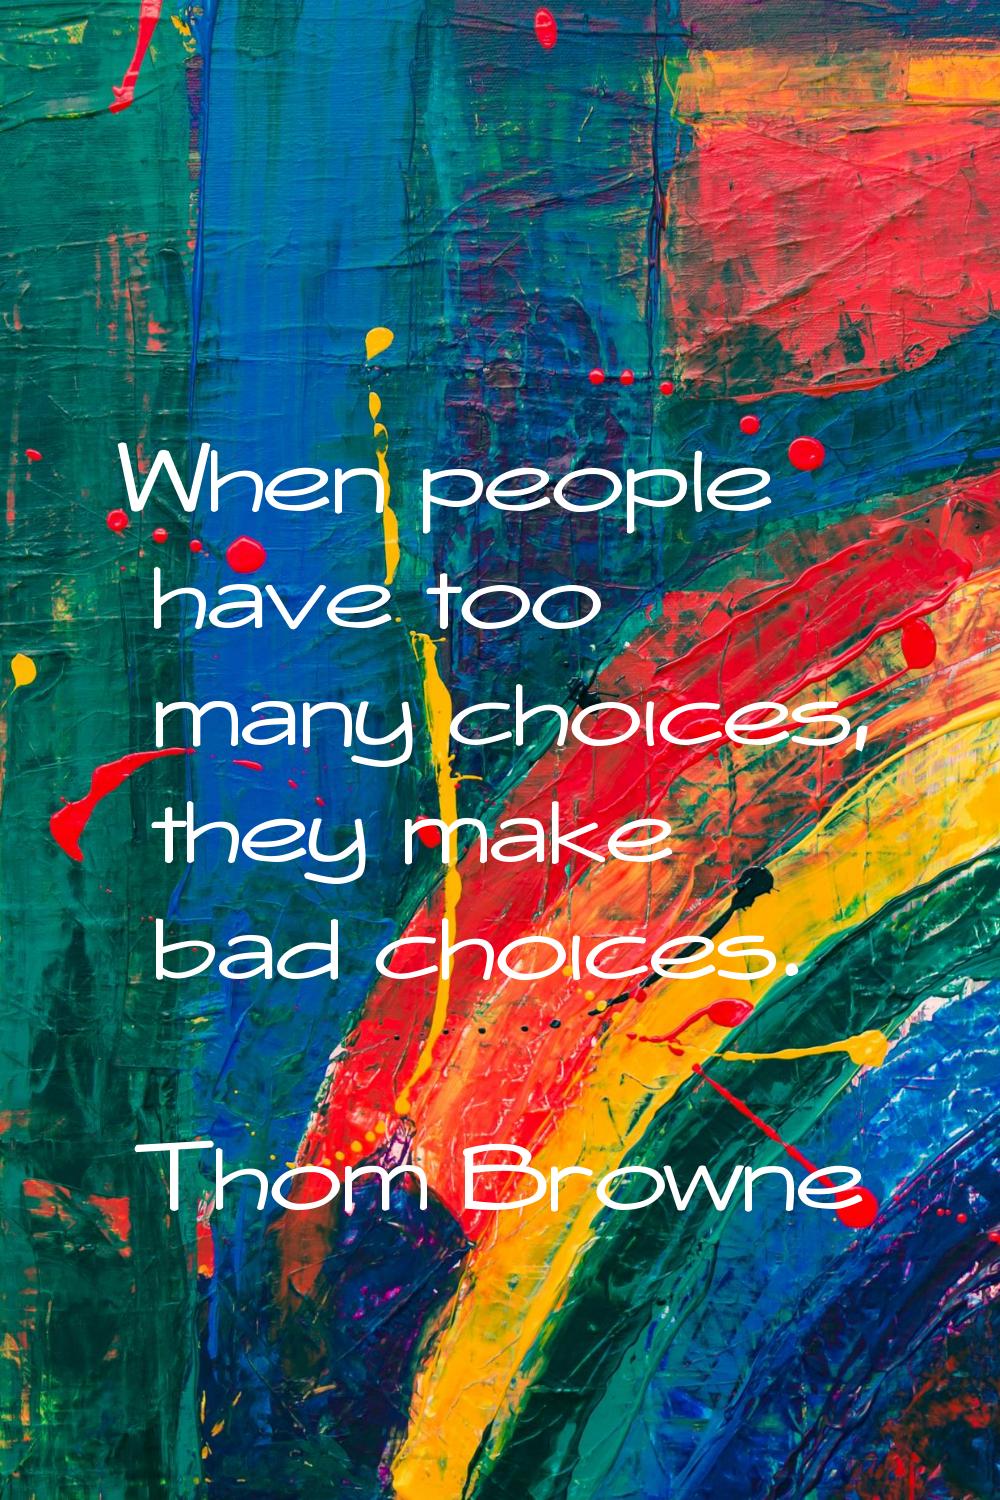 When people have too many choices, they make bad choices.